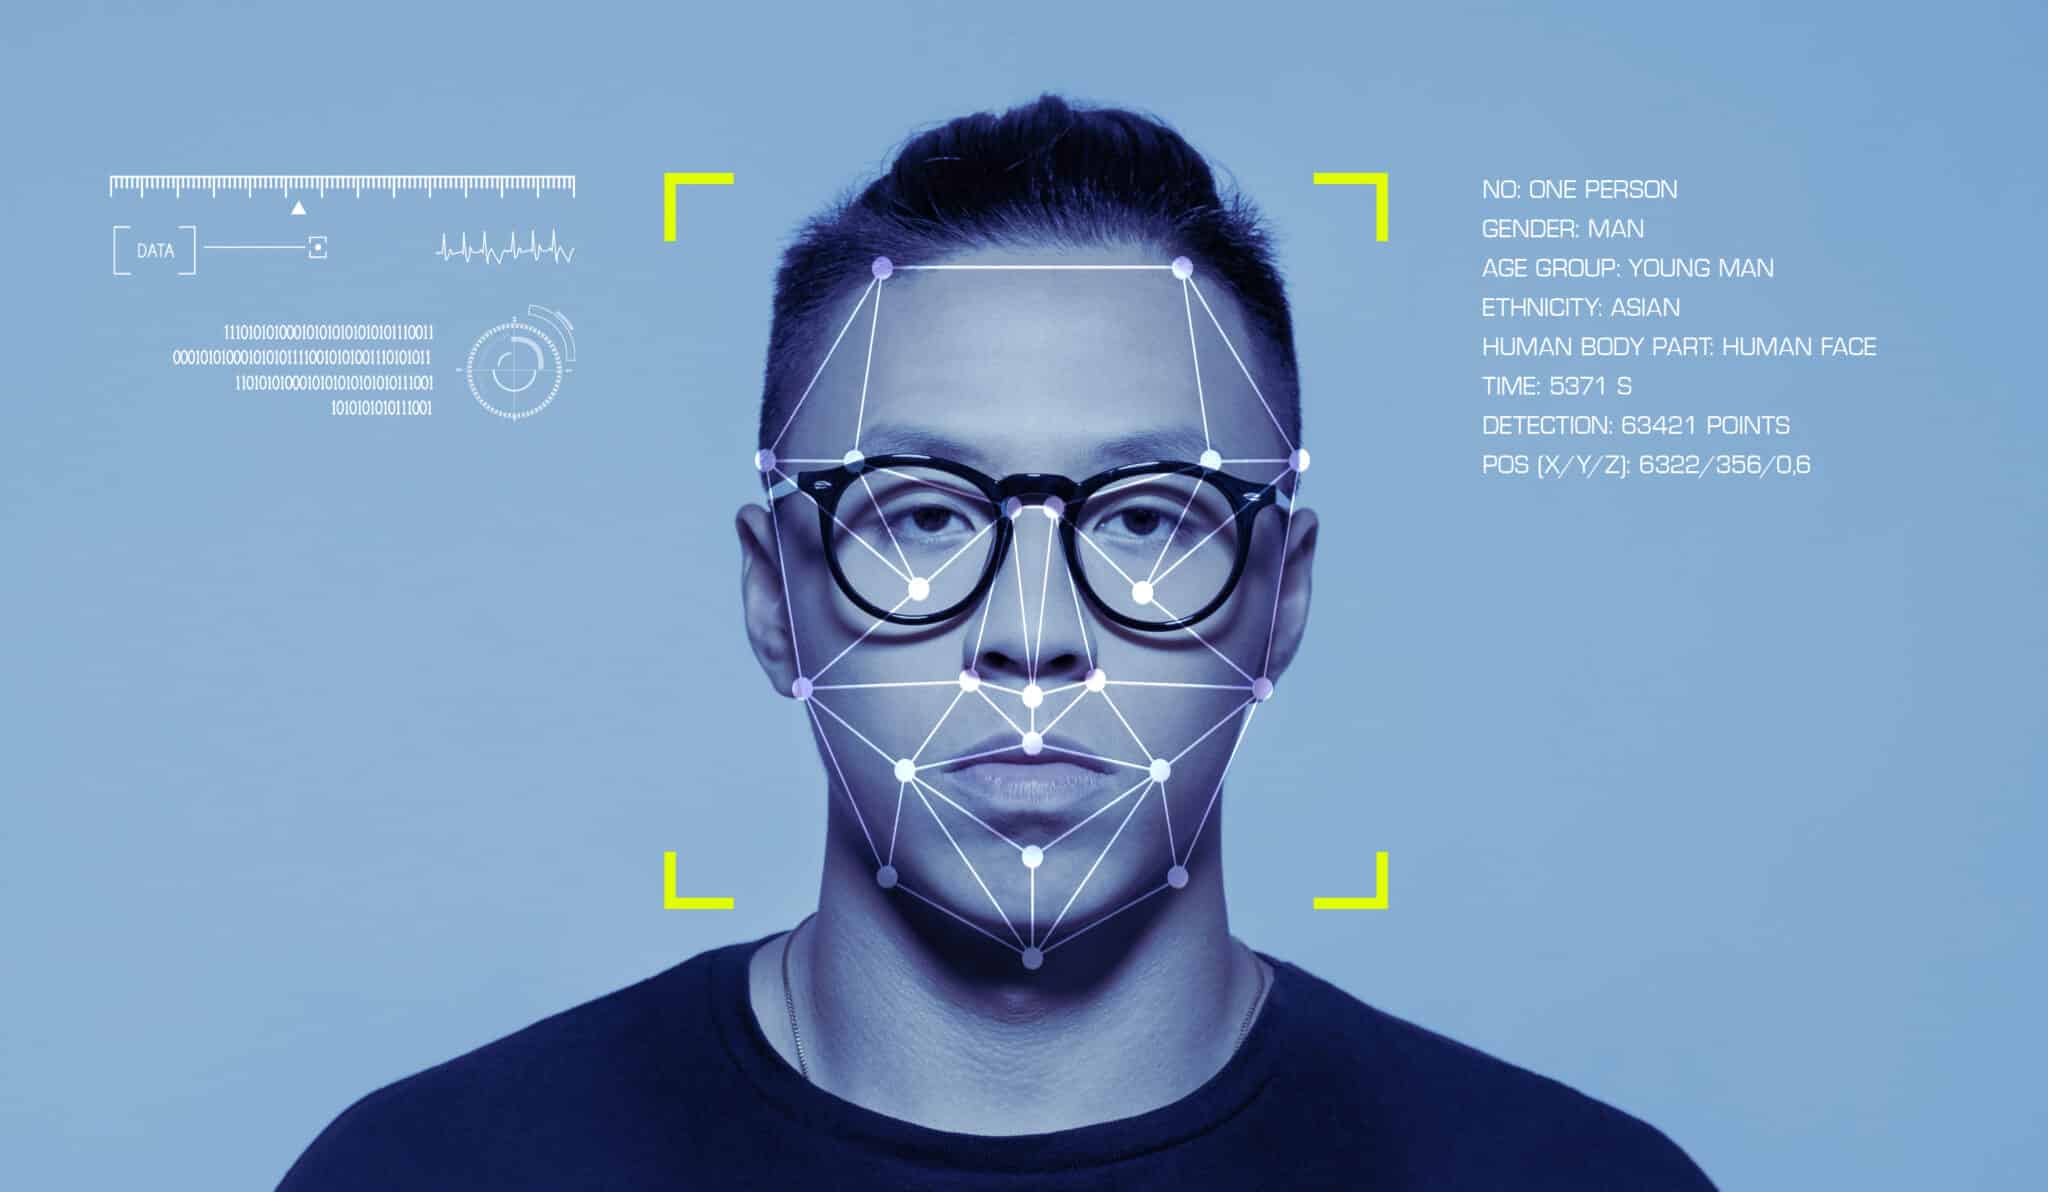 Man facial recognition with Deepface containing ethinicity, gender, age.